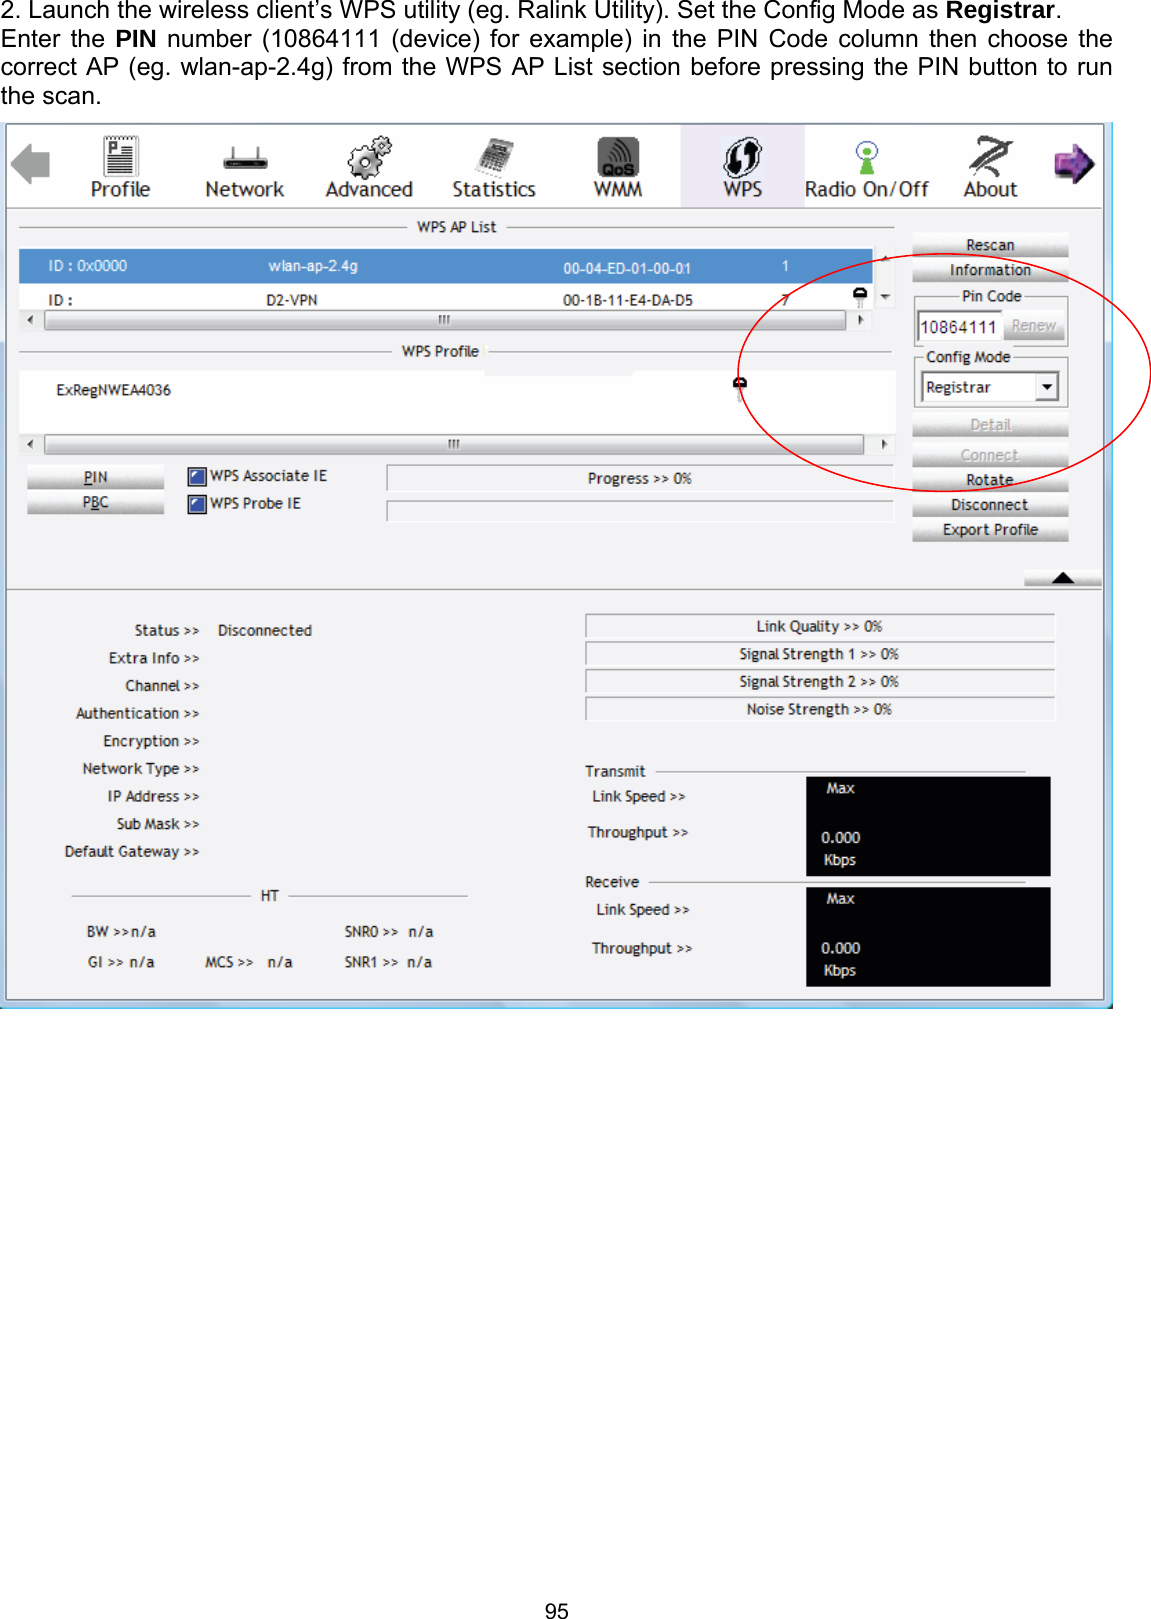  95  2. Launch the wireless client’s WPS utility (eg. Ralink Utility). Set the Config Mode as Registrar. Enter the PIN number (10864111 (device) for example) in the PIN Code column then choose the correct AP (eg. wlan-ap-2.4g) from the WPS AP List section before pressing the PIN button to run the scan.               